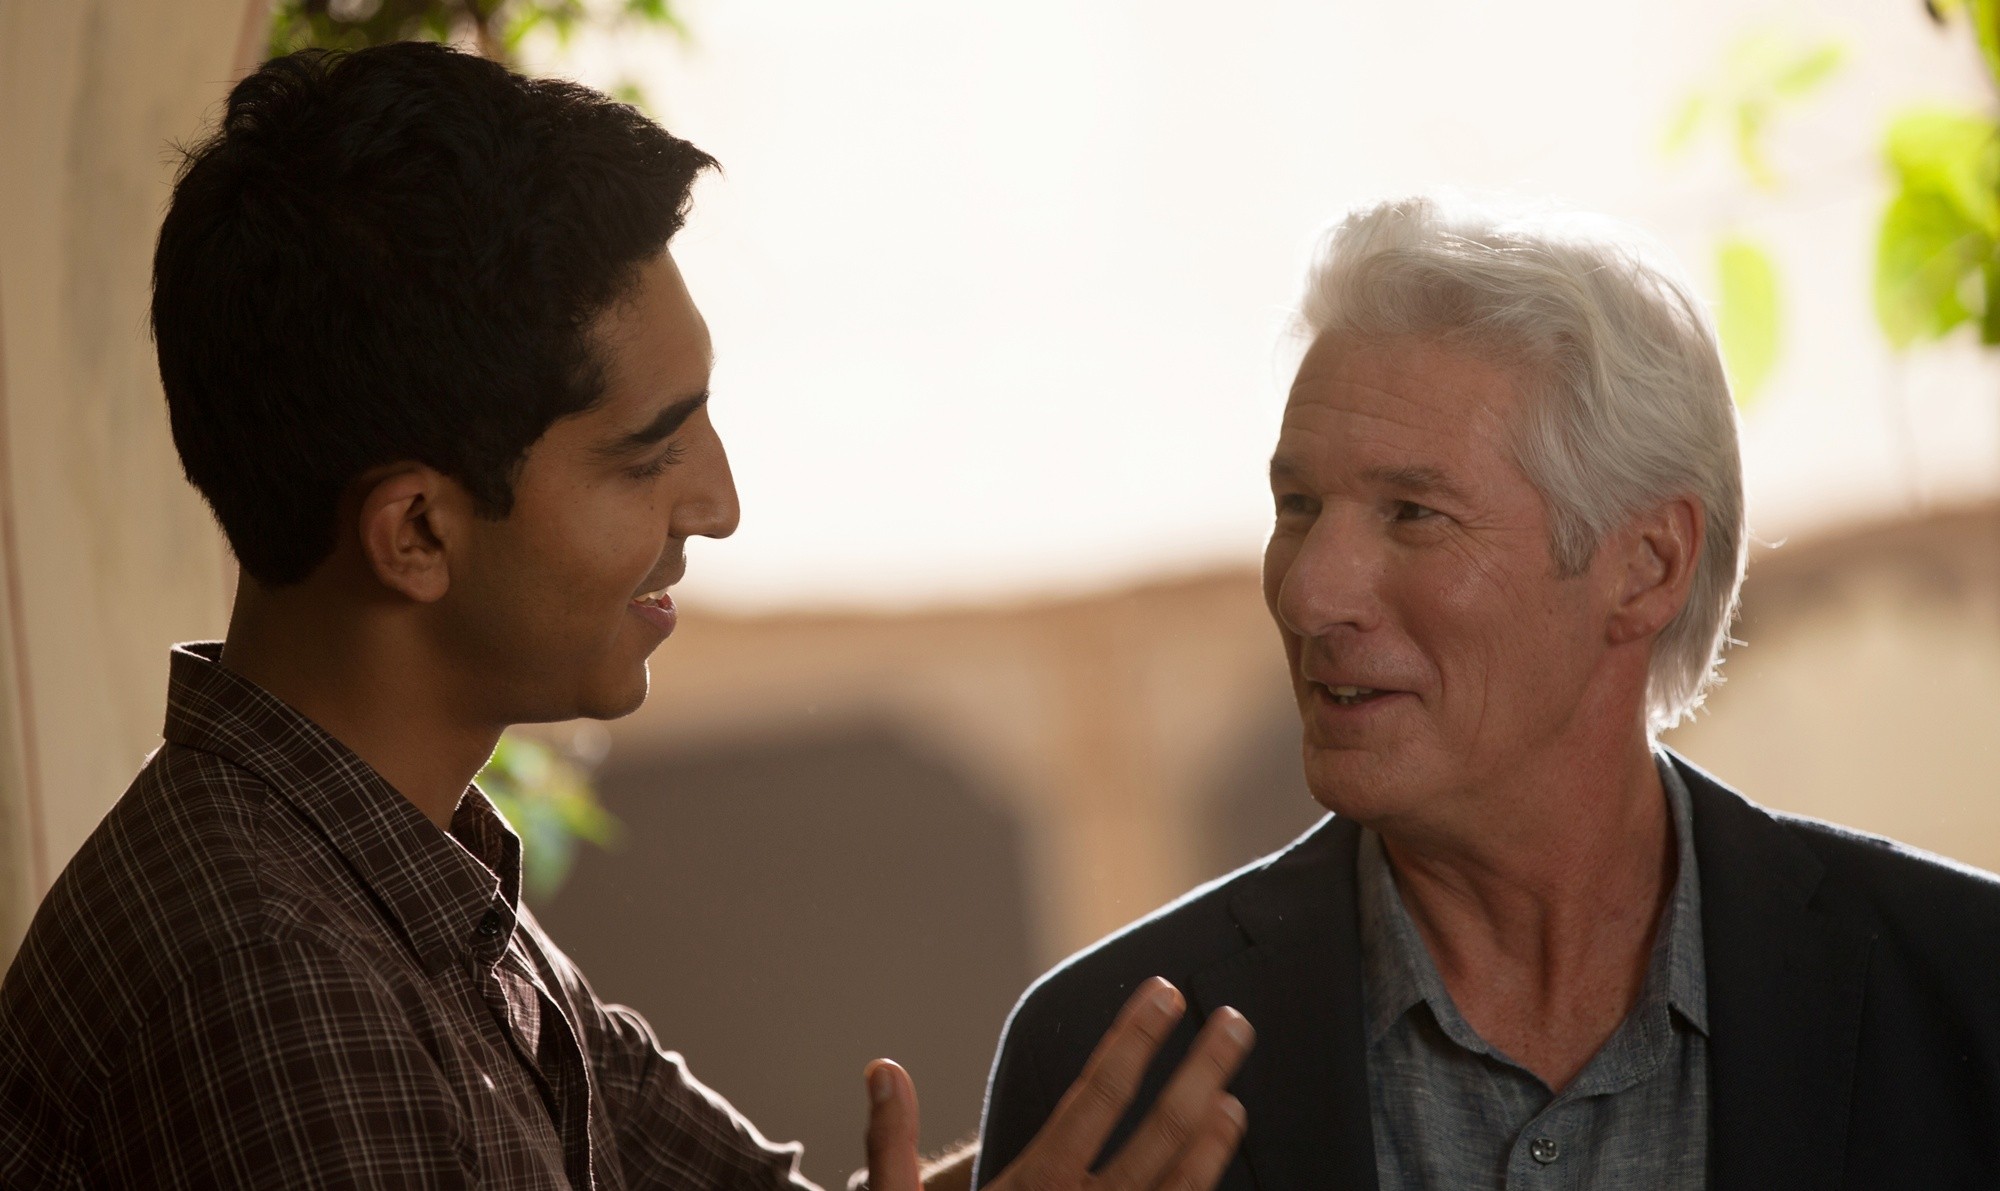 Dev Patel stars as Sonny Kapoor and Richard Gere stars as Guy in Fox Searchlight Pictures' The Second Best Exotic Marigold Hotel (2015)